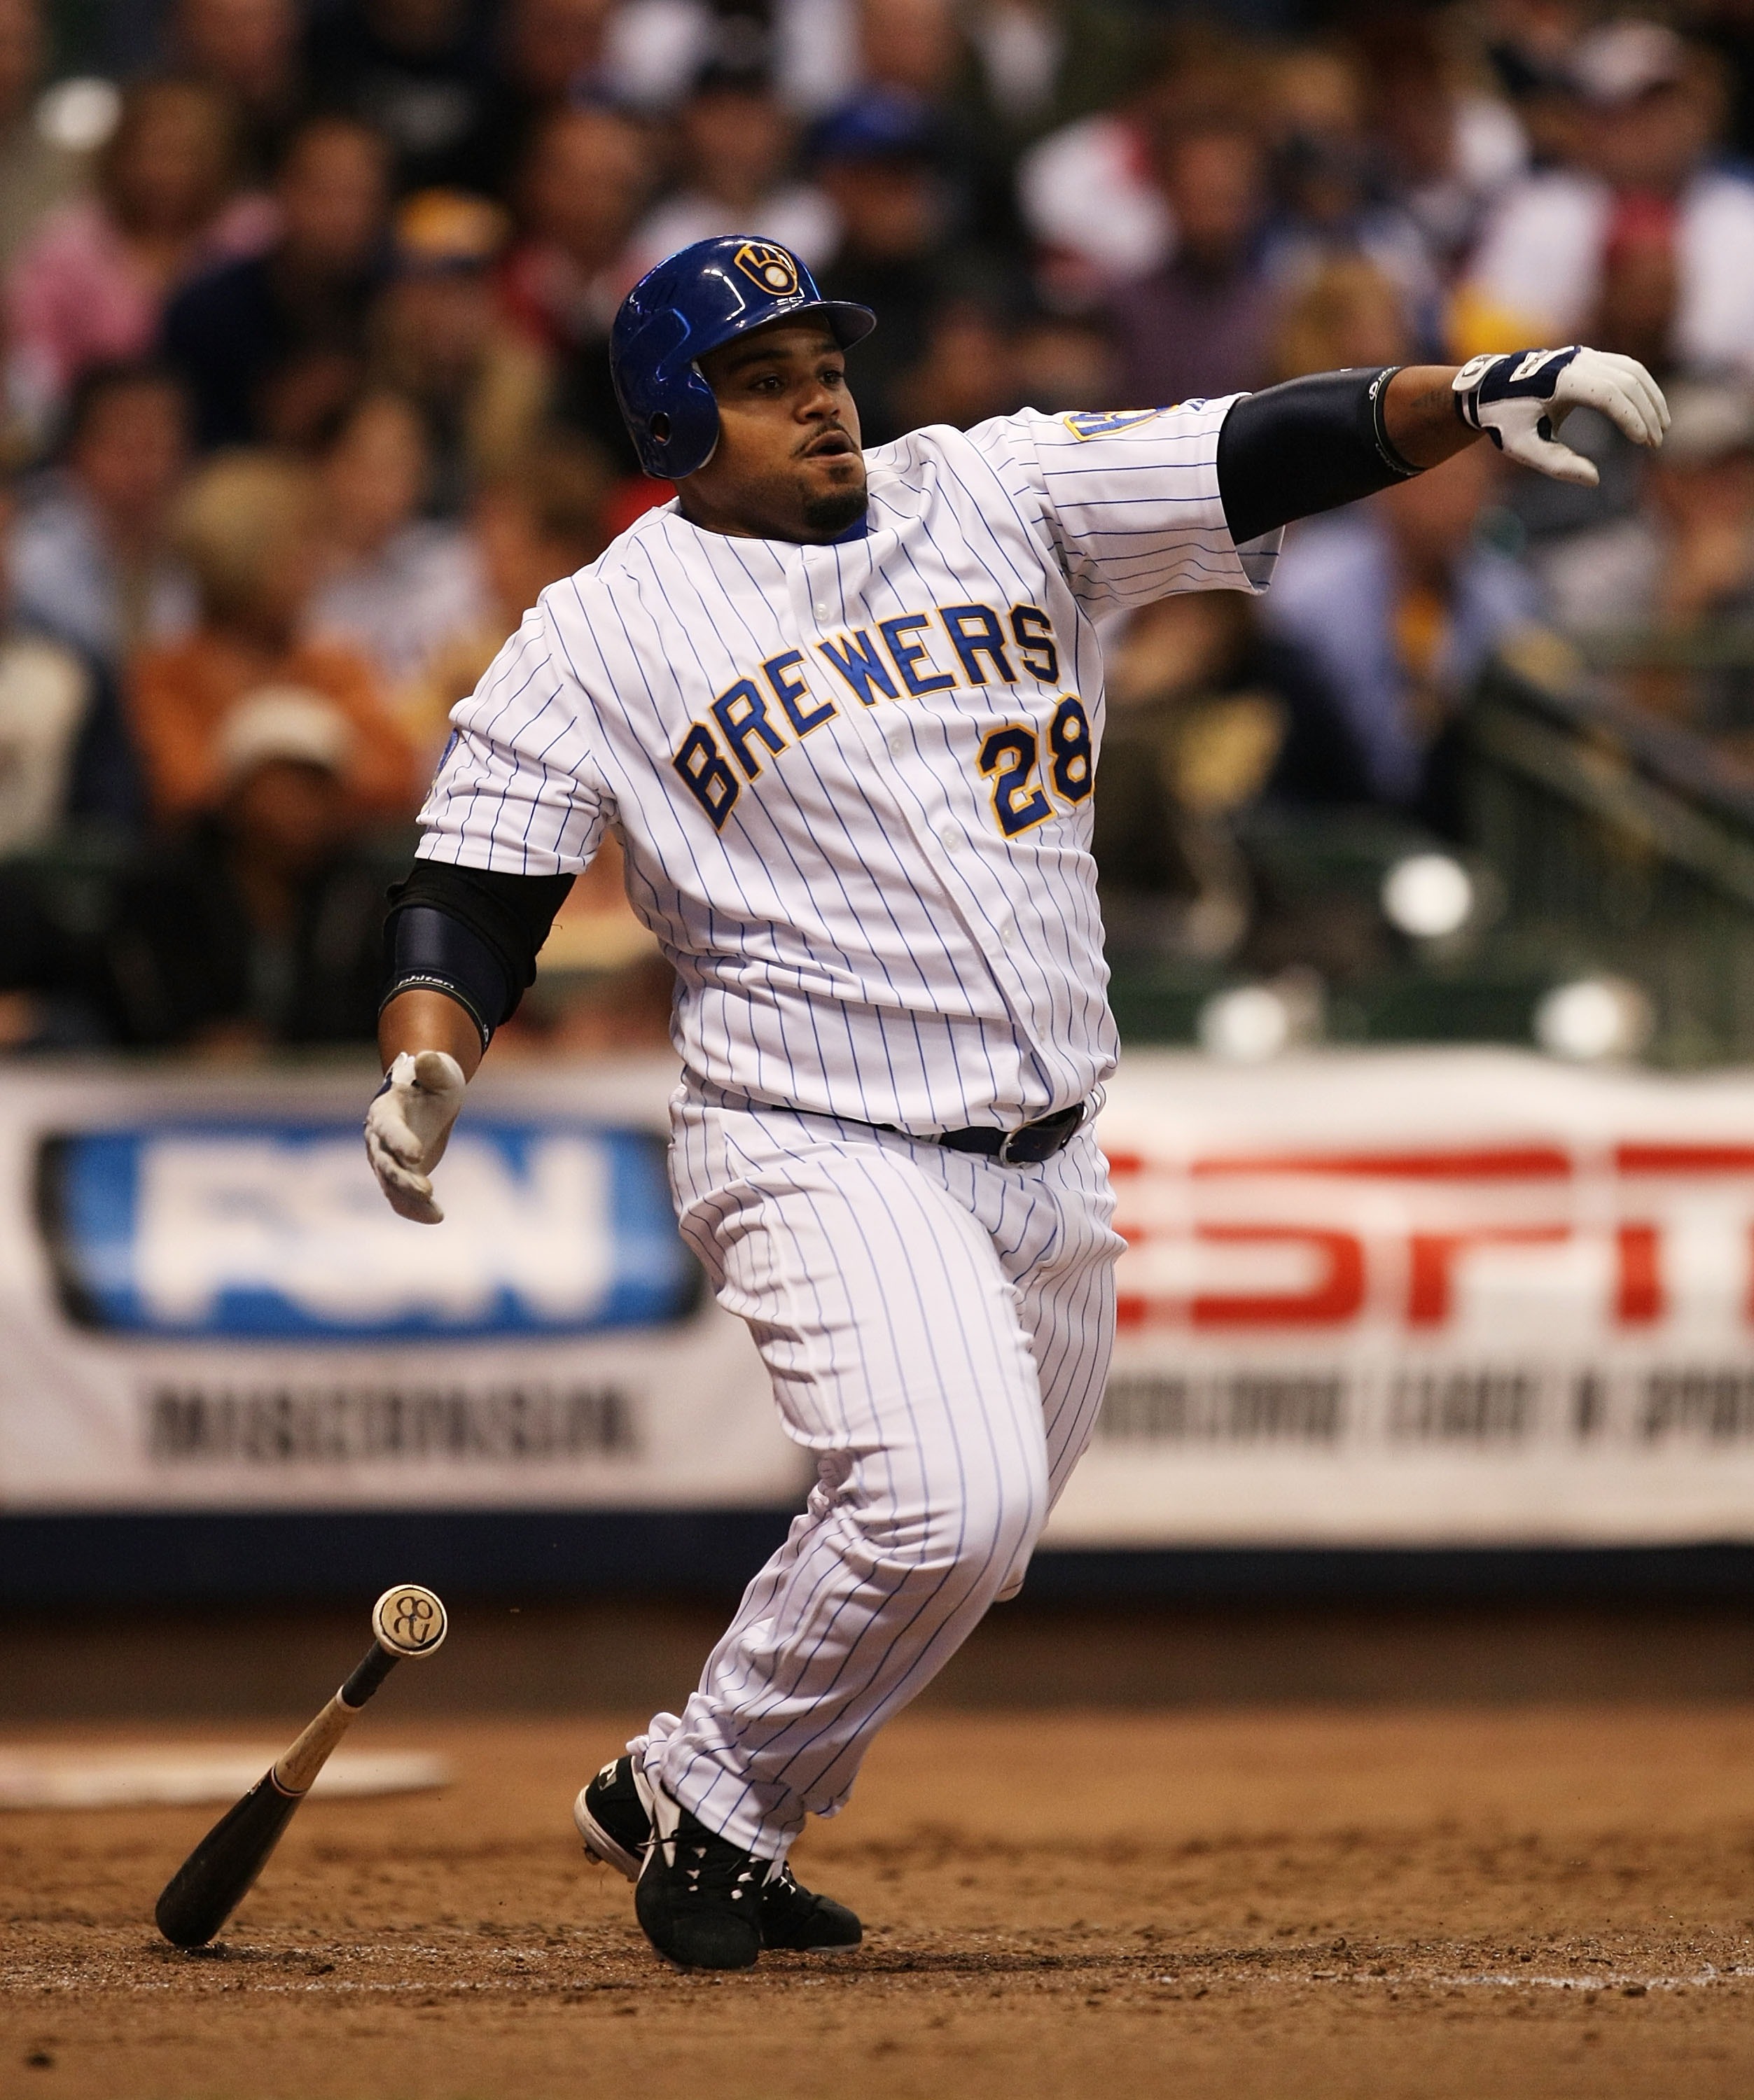 MILWAUKEE - SEPTEMBER 28: Prince Fielder #28 of the Milwaukee Brewers starts to run on a ground-out against the San Diego Padres on September 28, 2007 at Miller Park in Milwaukee, Wisconsin. The Padres defeated the Brewers 6-3. (Photo by Jonathan Daniel/G